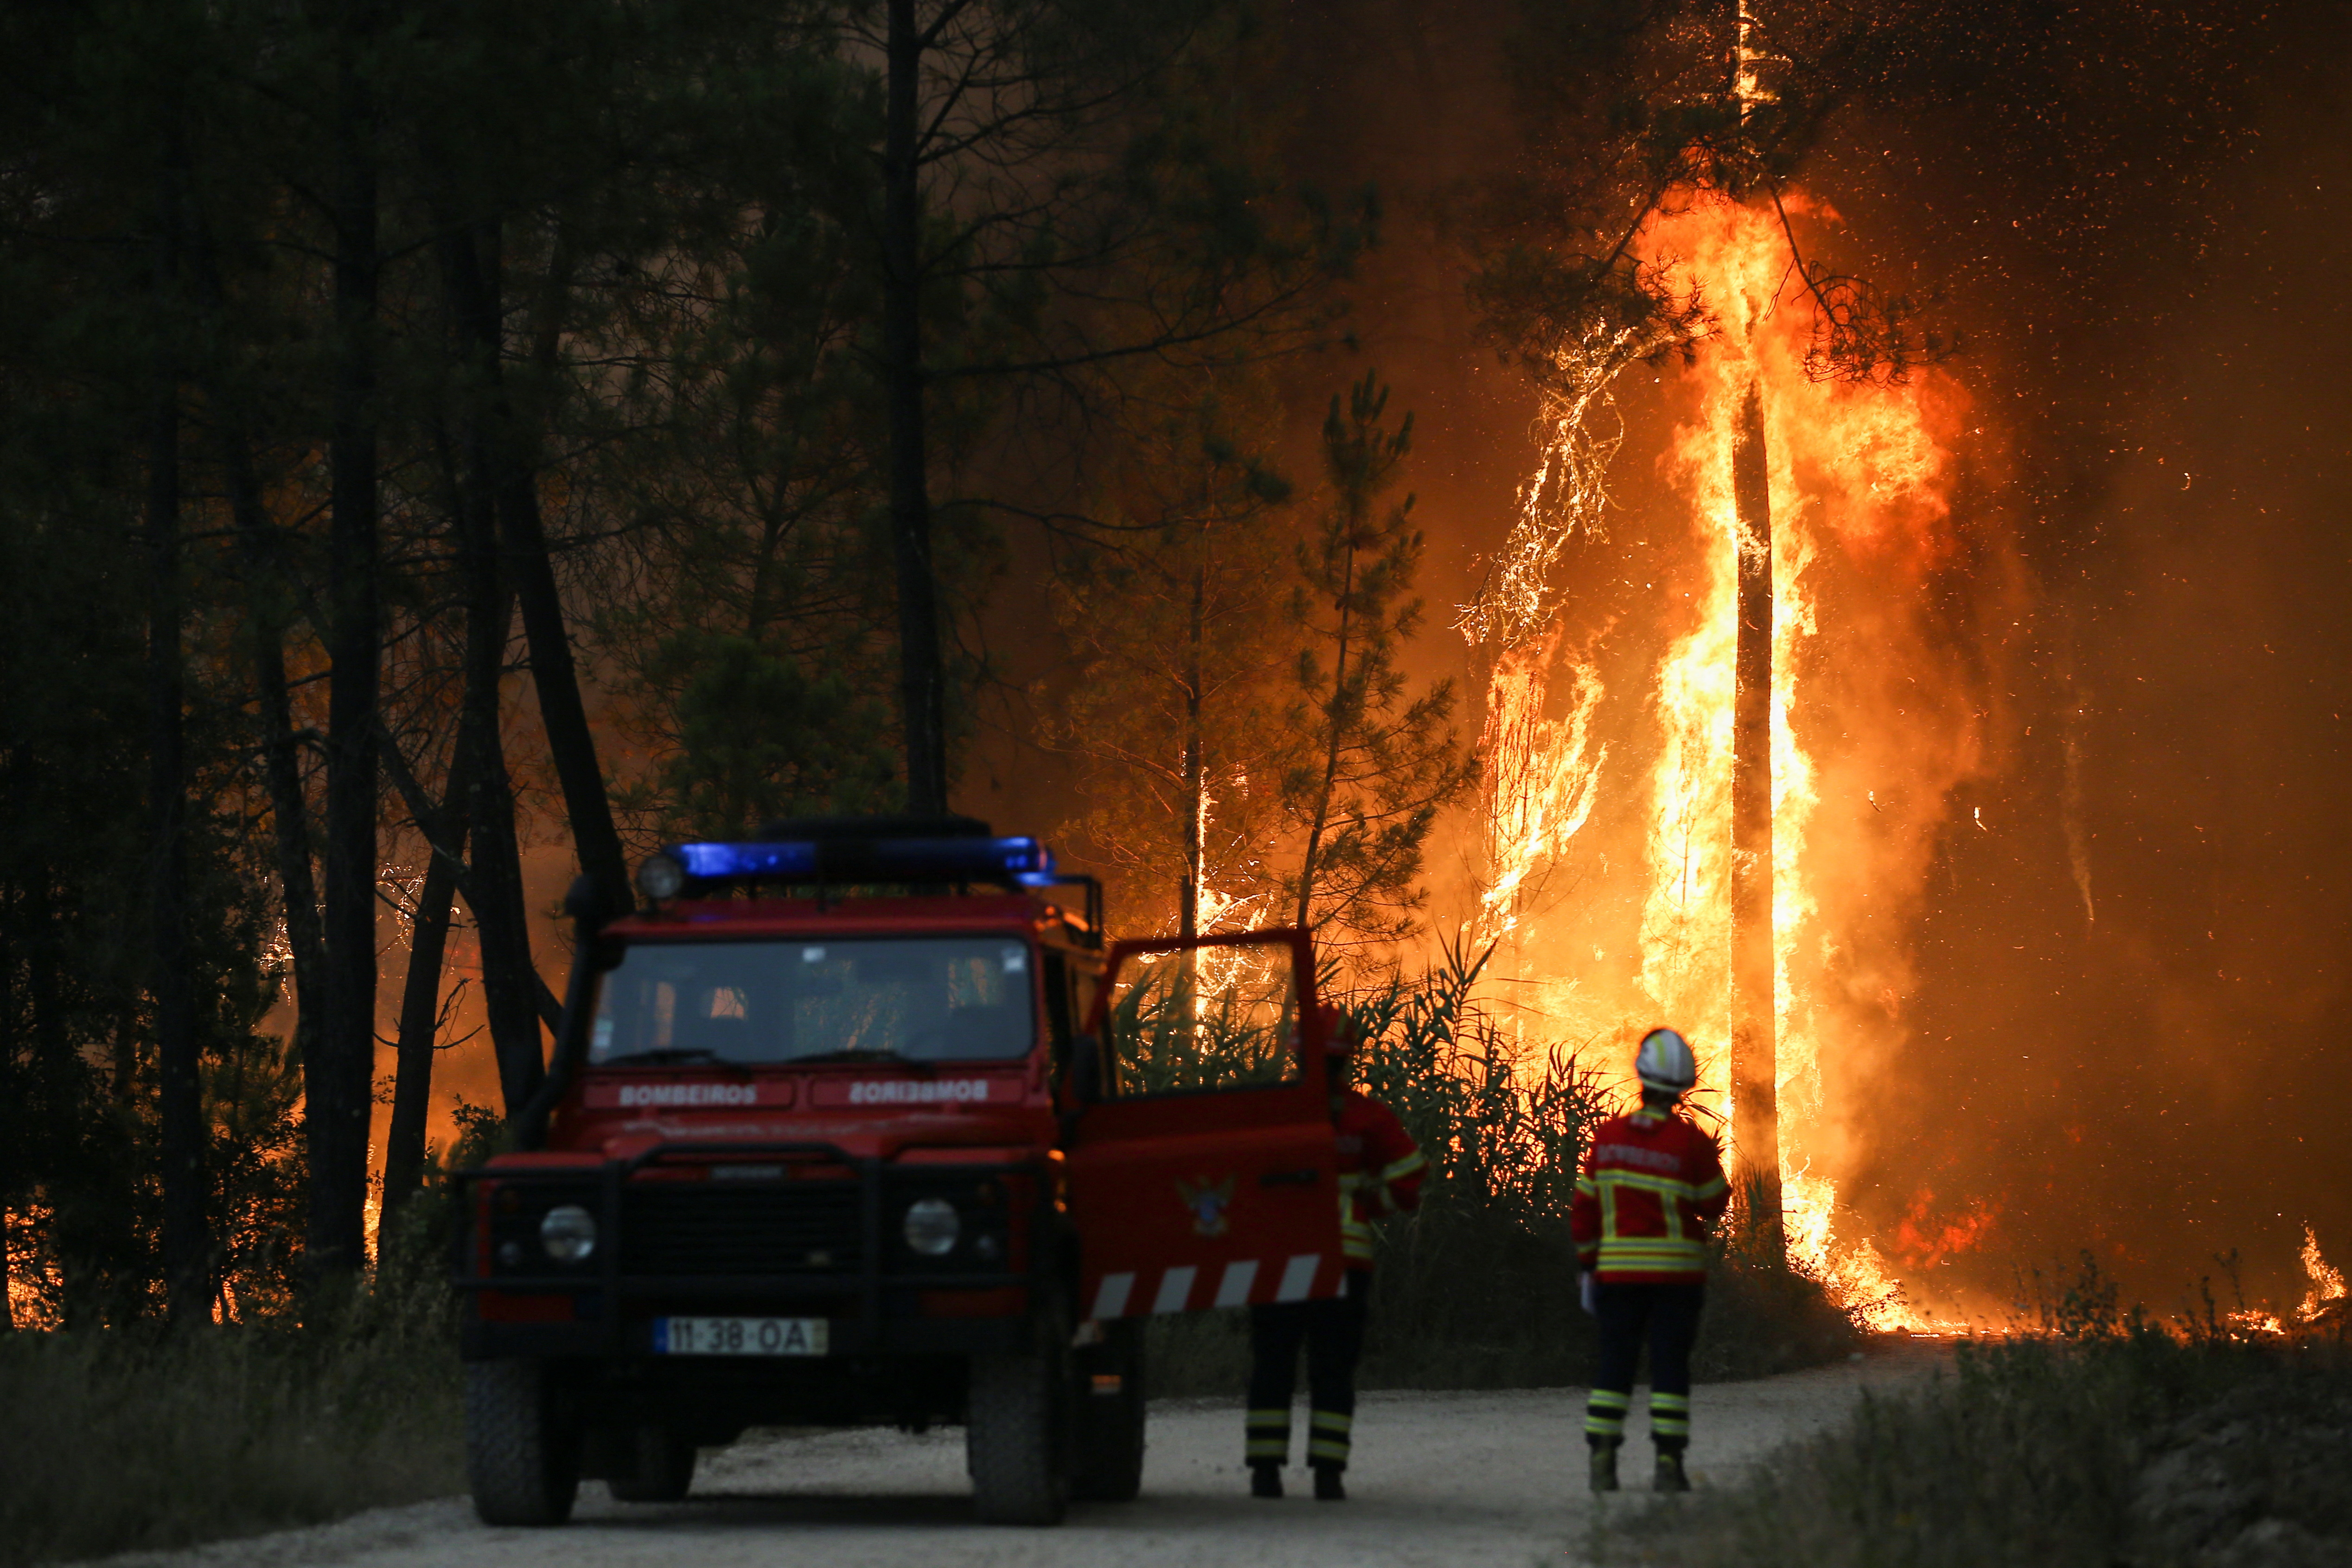 Firefighters watch a wildfire in Ourem